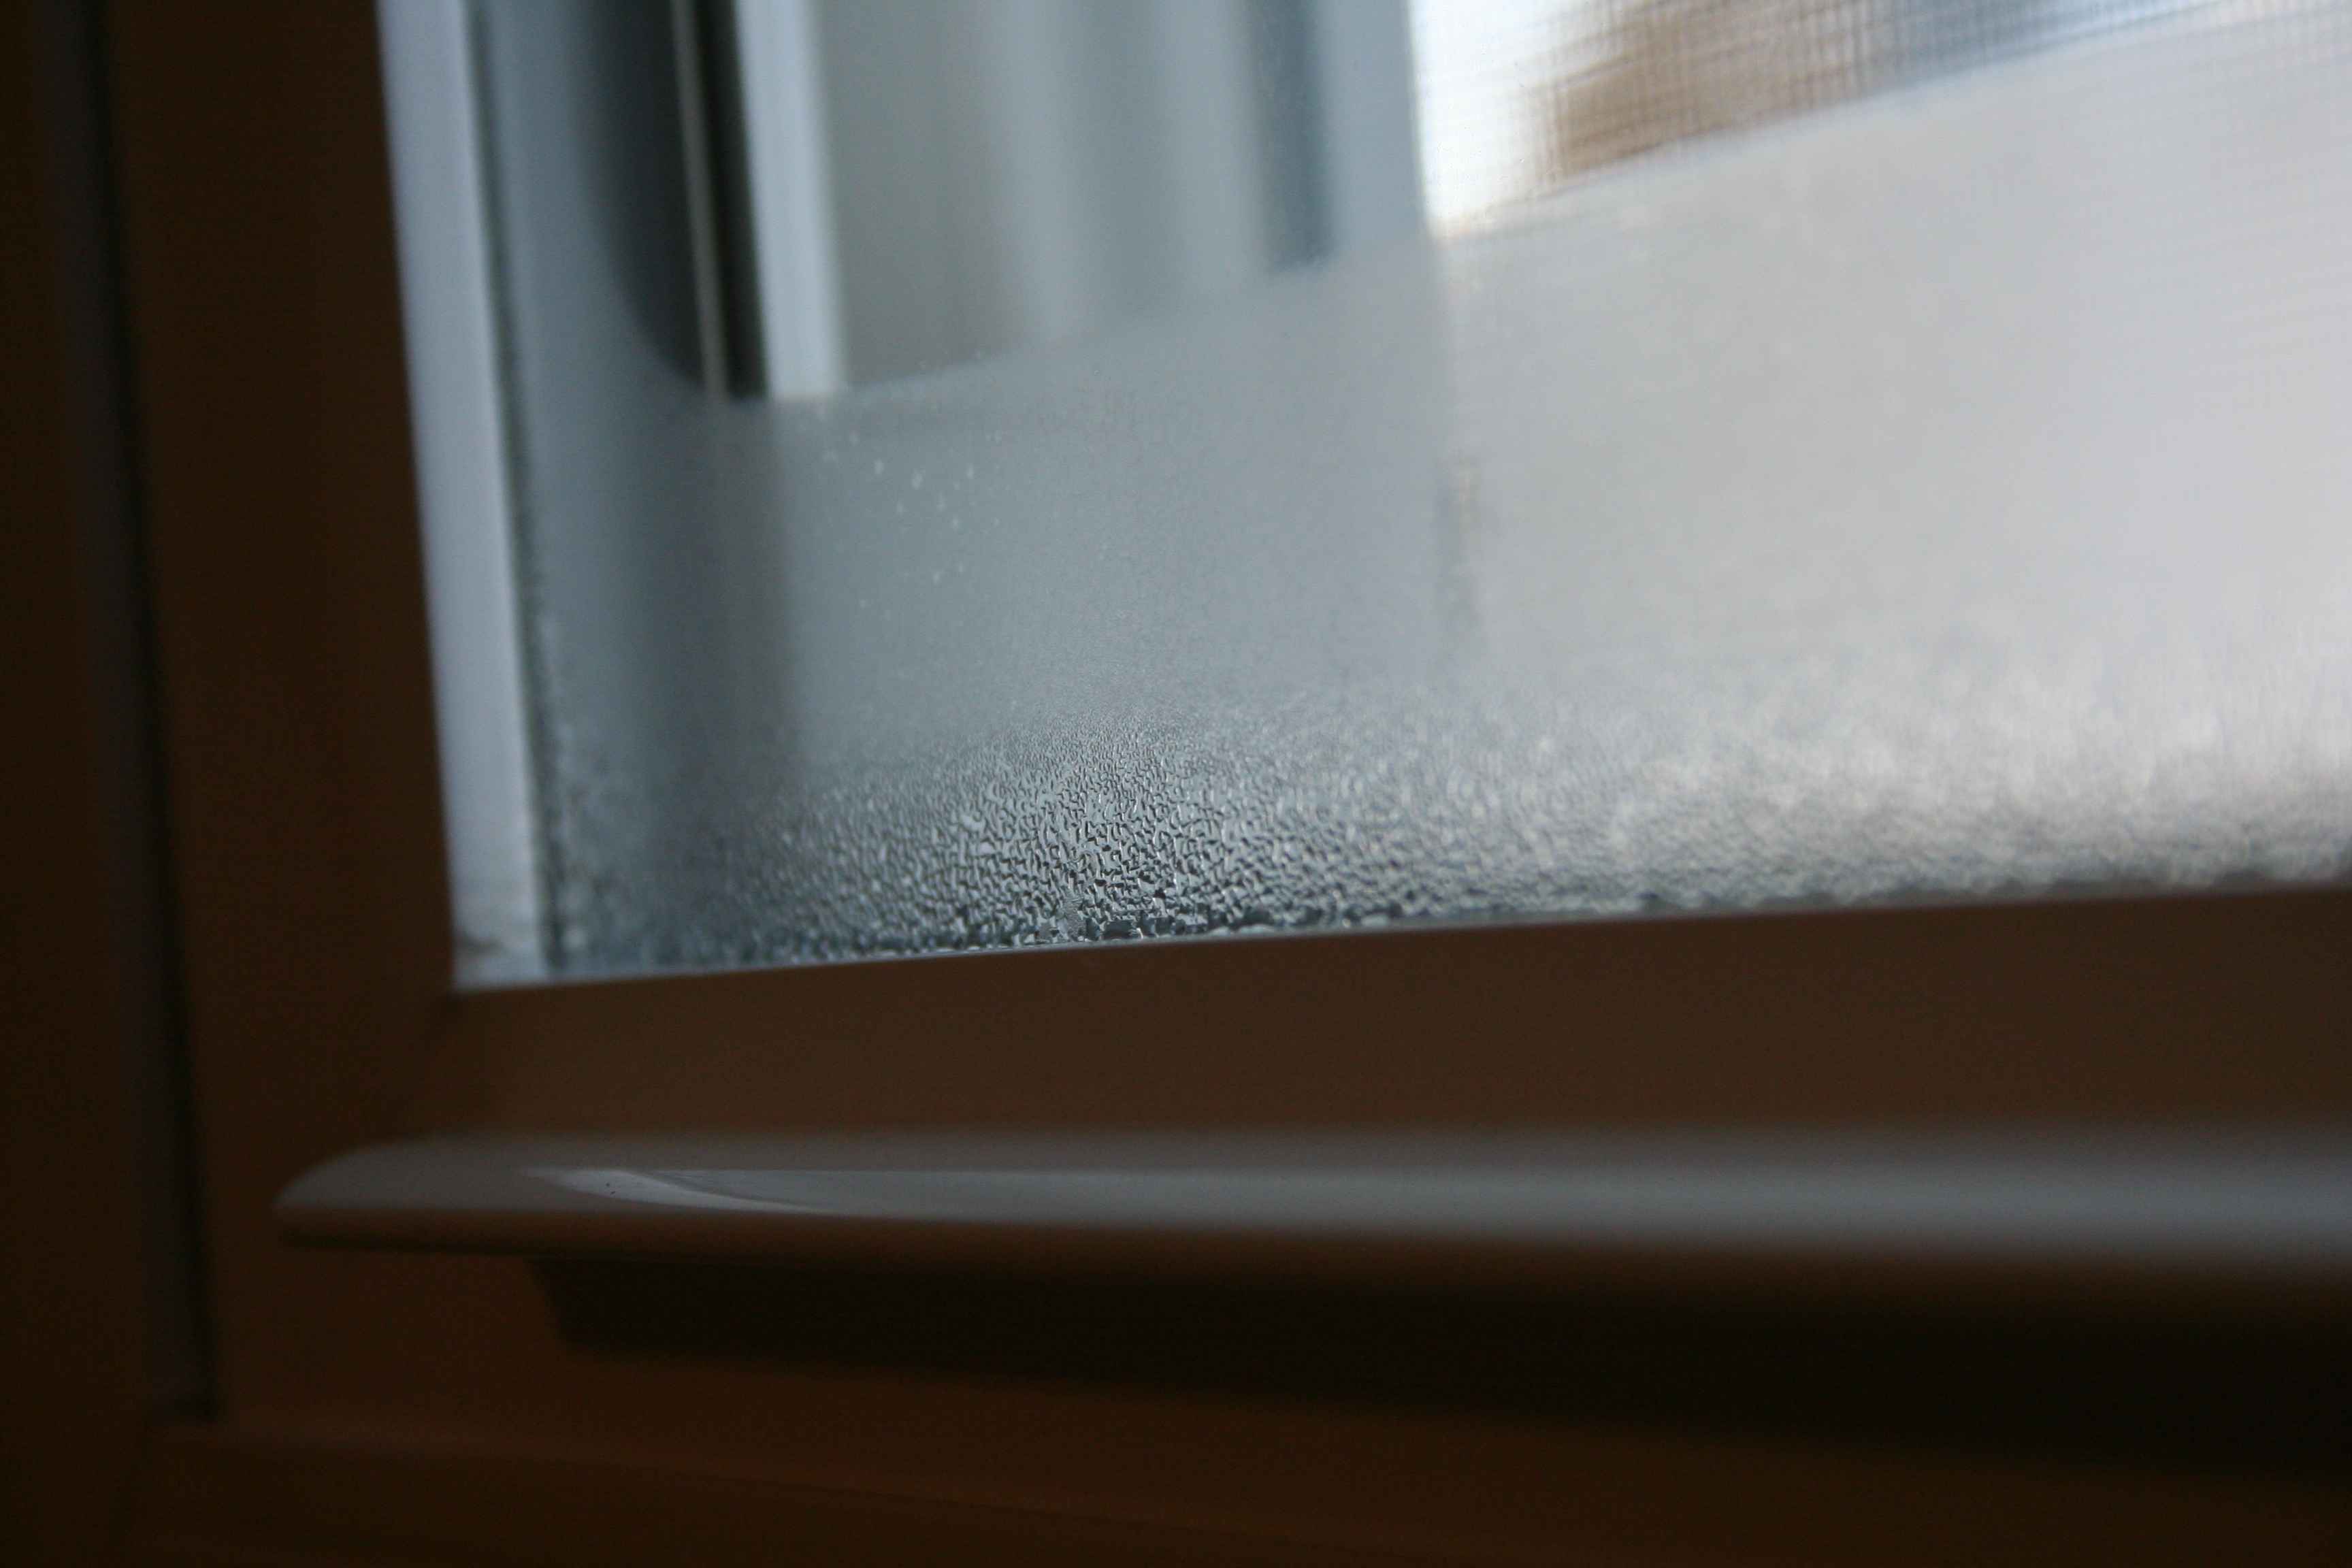 Insulated Glass Seal Failure, window condensation